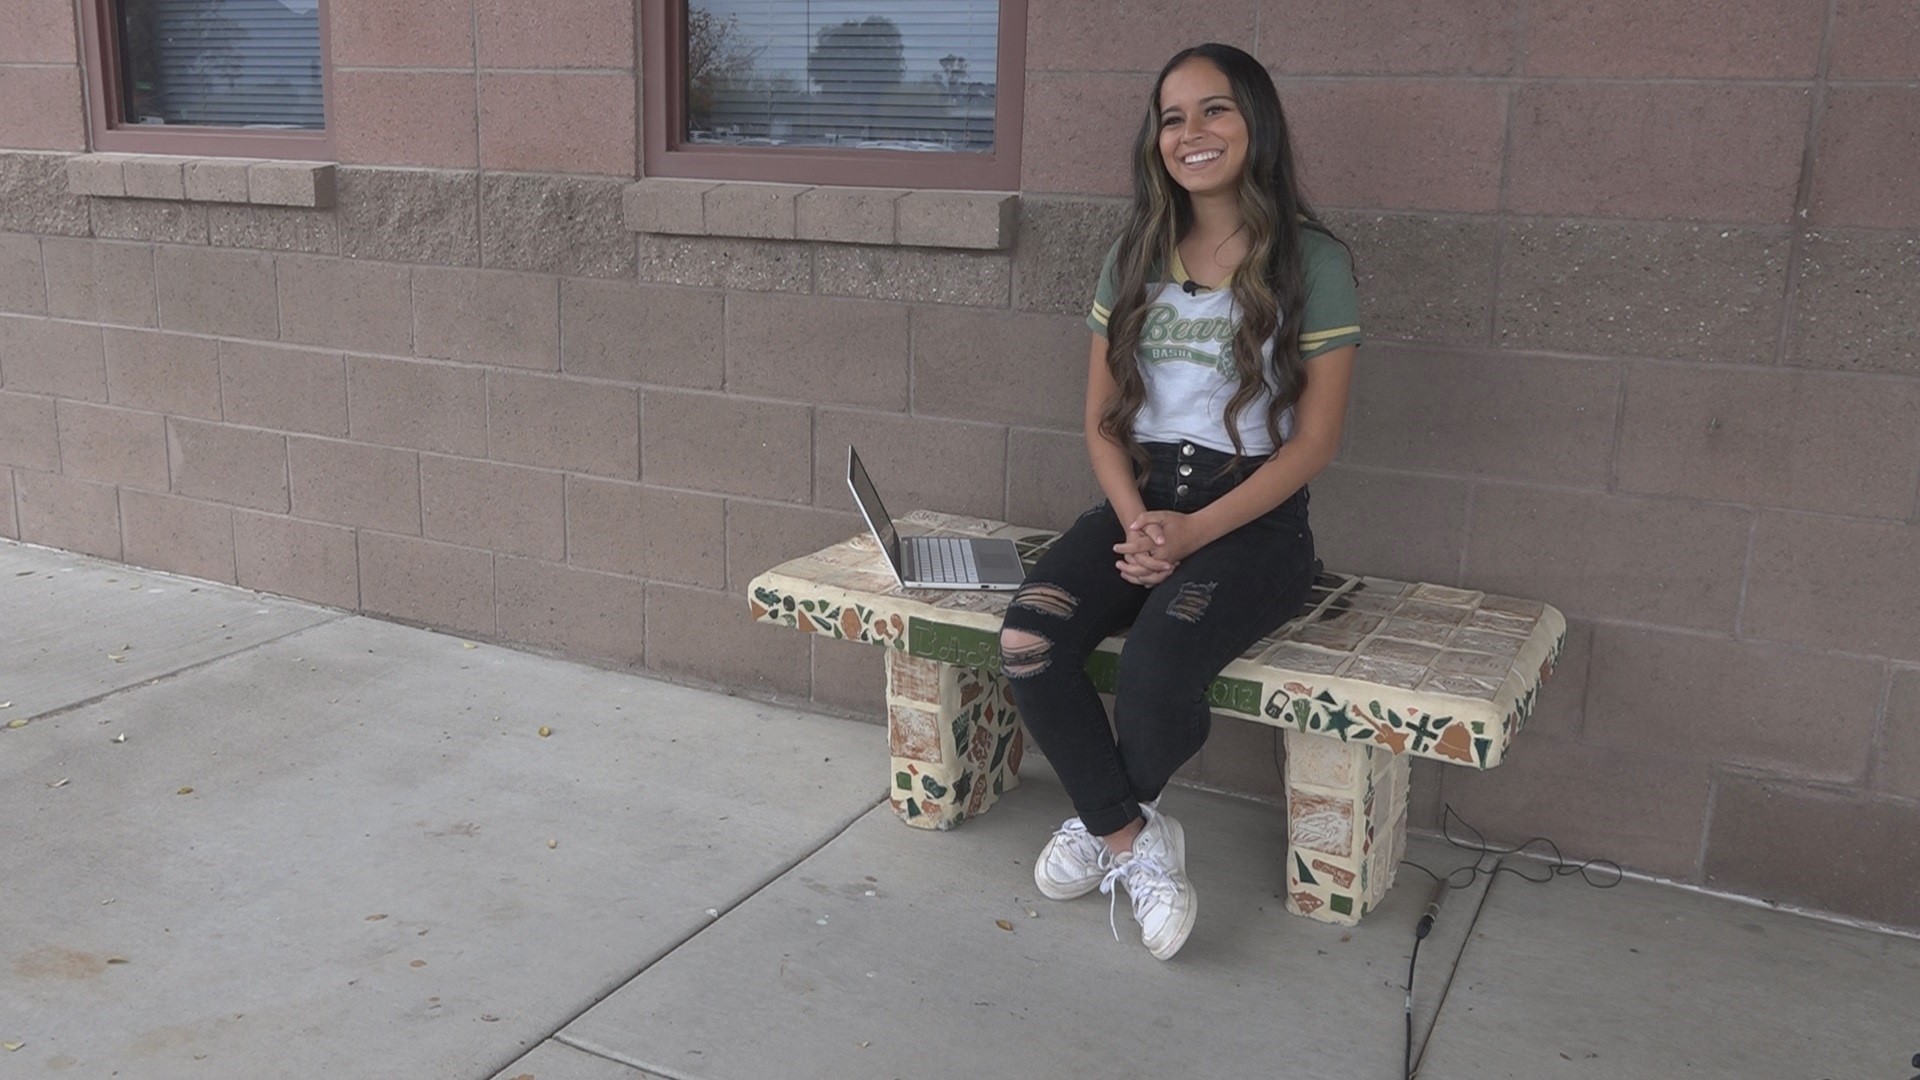 It’s a graduation requirement to do something to give back to the community at Basha High School. One senior is using her service project to offer scholarships.